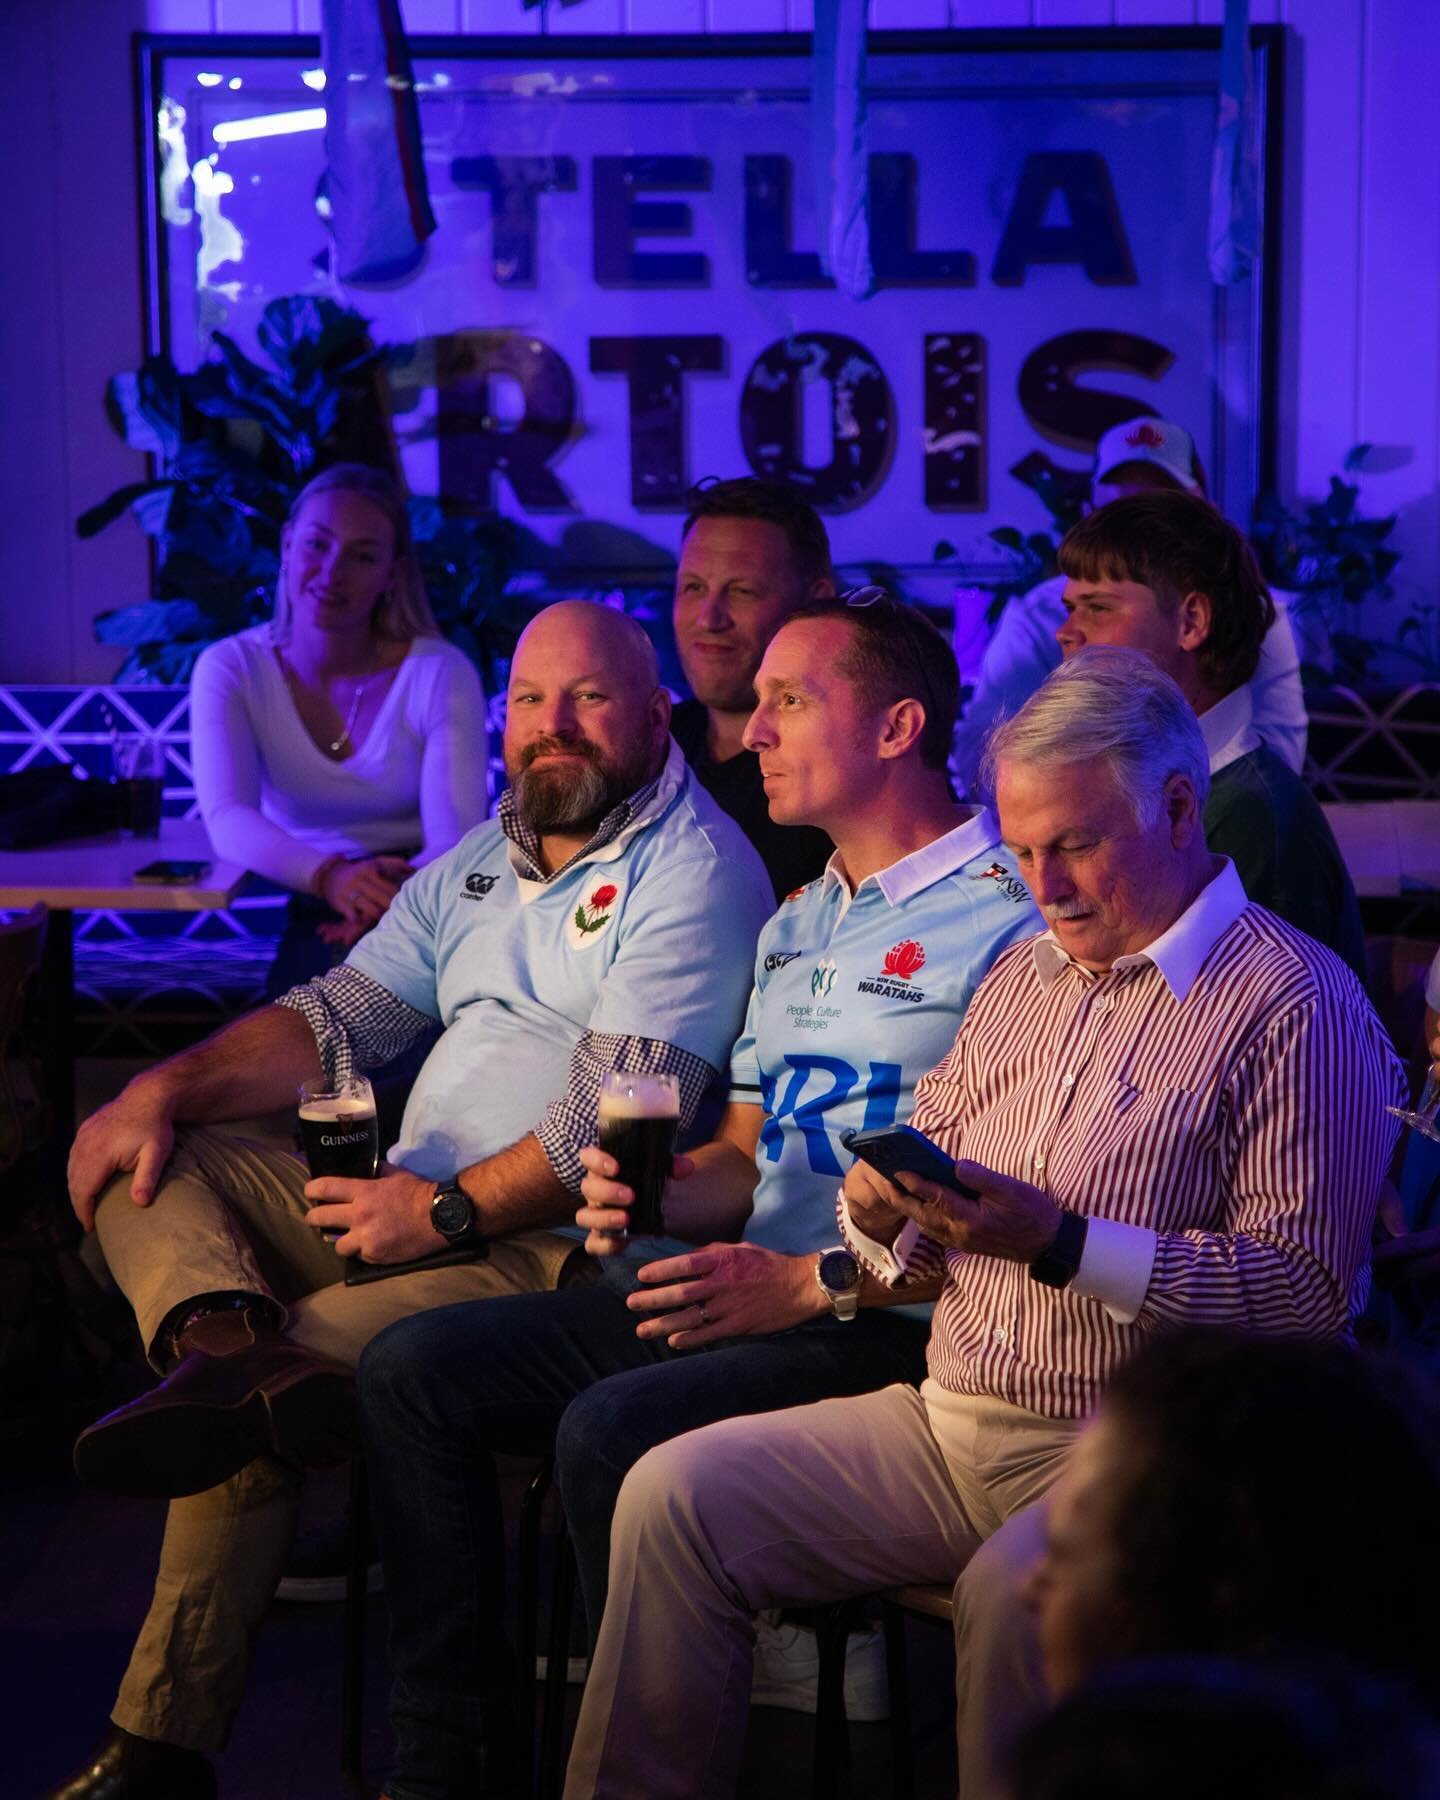 Last Wednesday we had the pleasure of hosting @stansportrugby &amp; @nswwaratahs episode of Stan On The Road at The London! 🇬🇧

Enjoy some BTS shots of this awesome night &amp; thank you to everyone involved!

Up the Tahs! 💙🤍